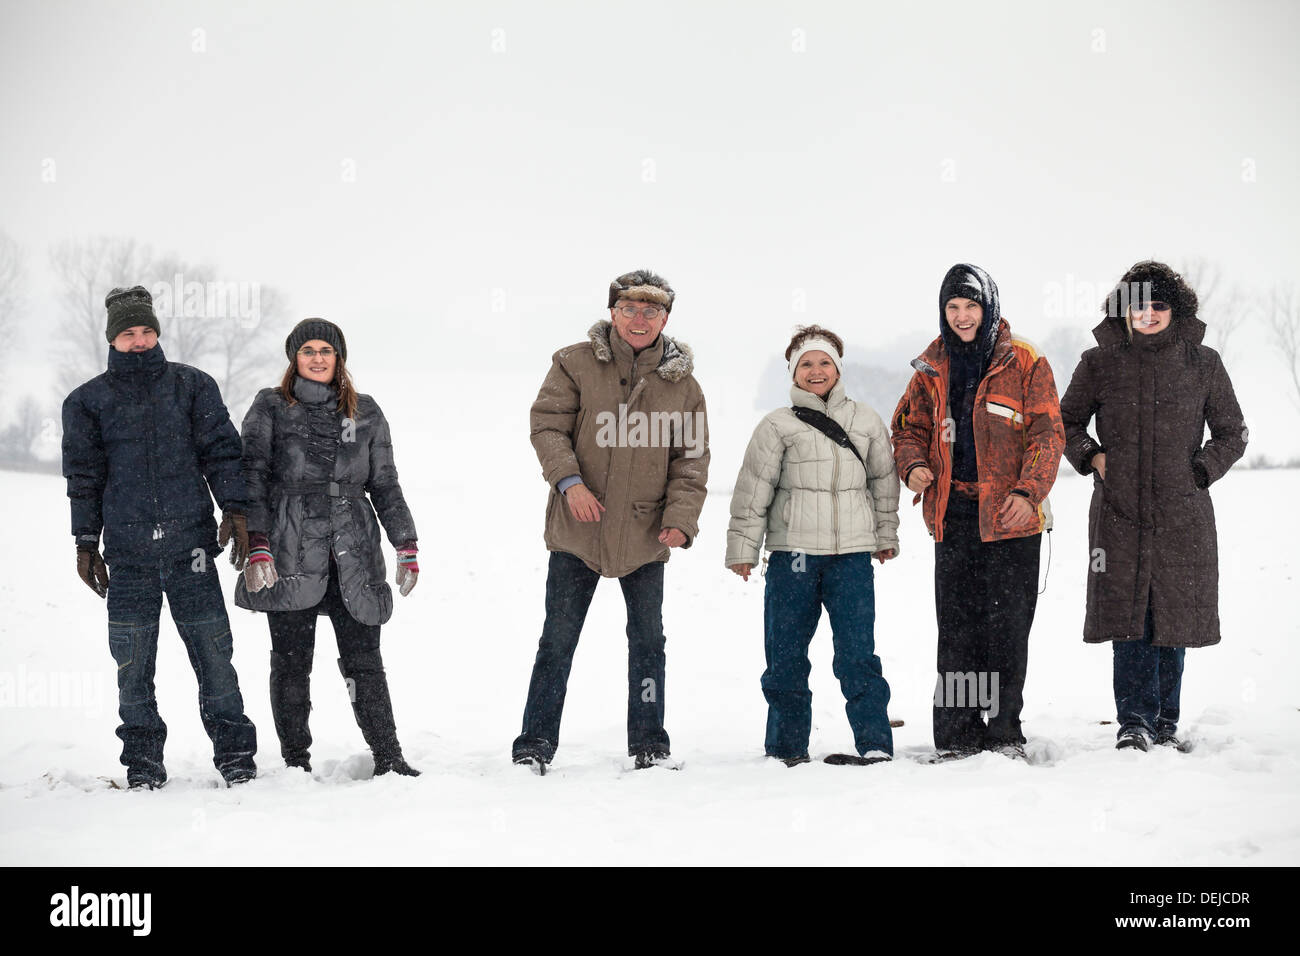 Group of happy people enjoying winter in snow. Stock Photo